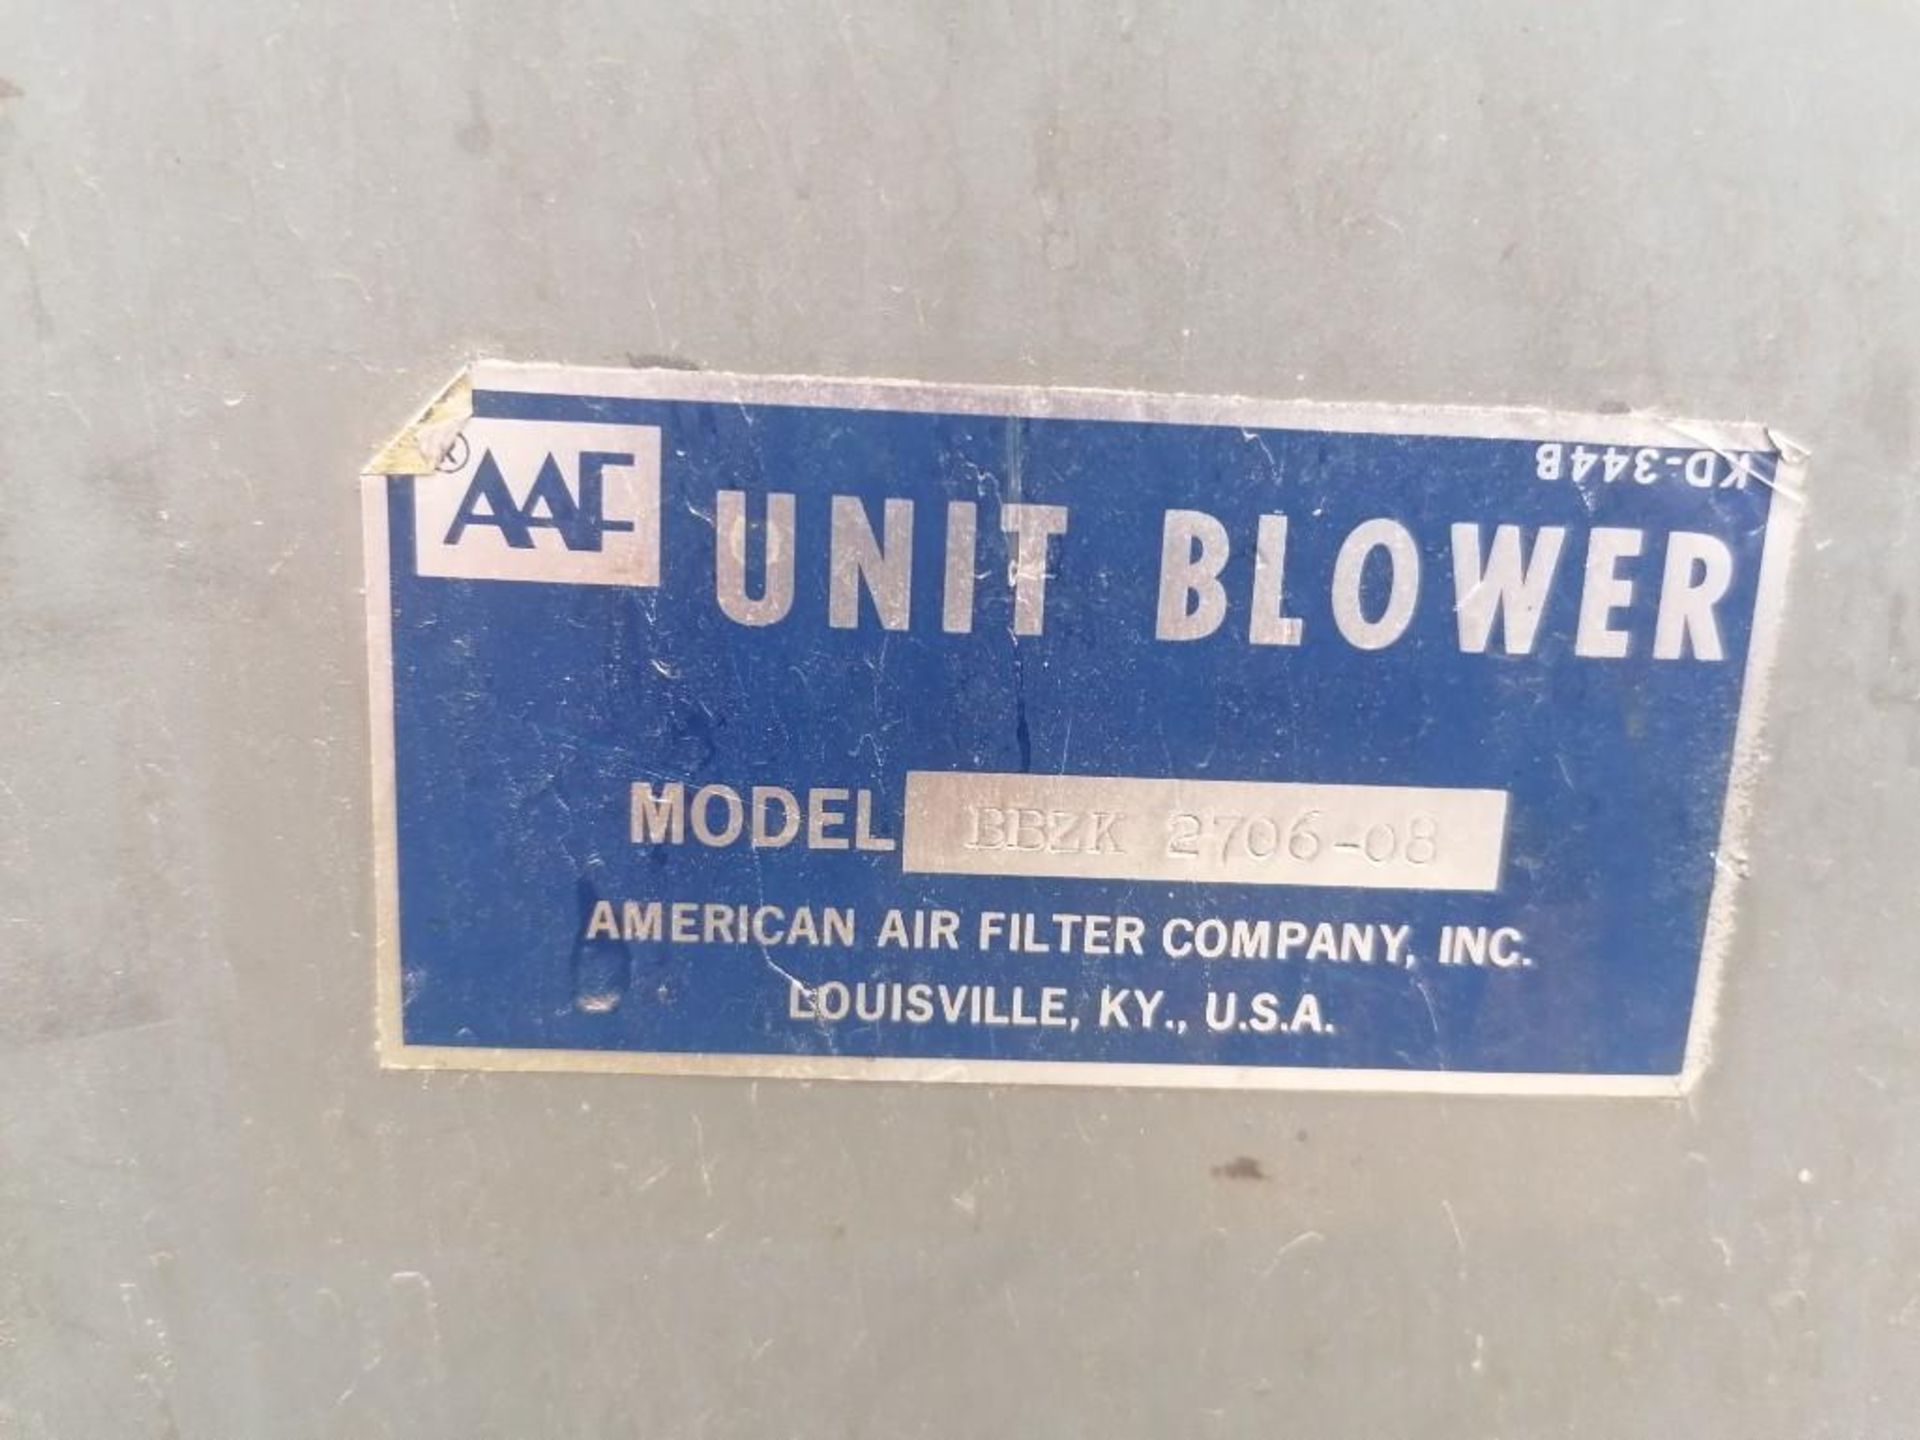 (1) American Air Filter Unit Blower, Model BBZK 2706-08. Located in Mt. Pleasant, IA. - Image 2 of 8